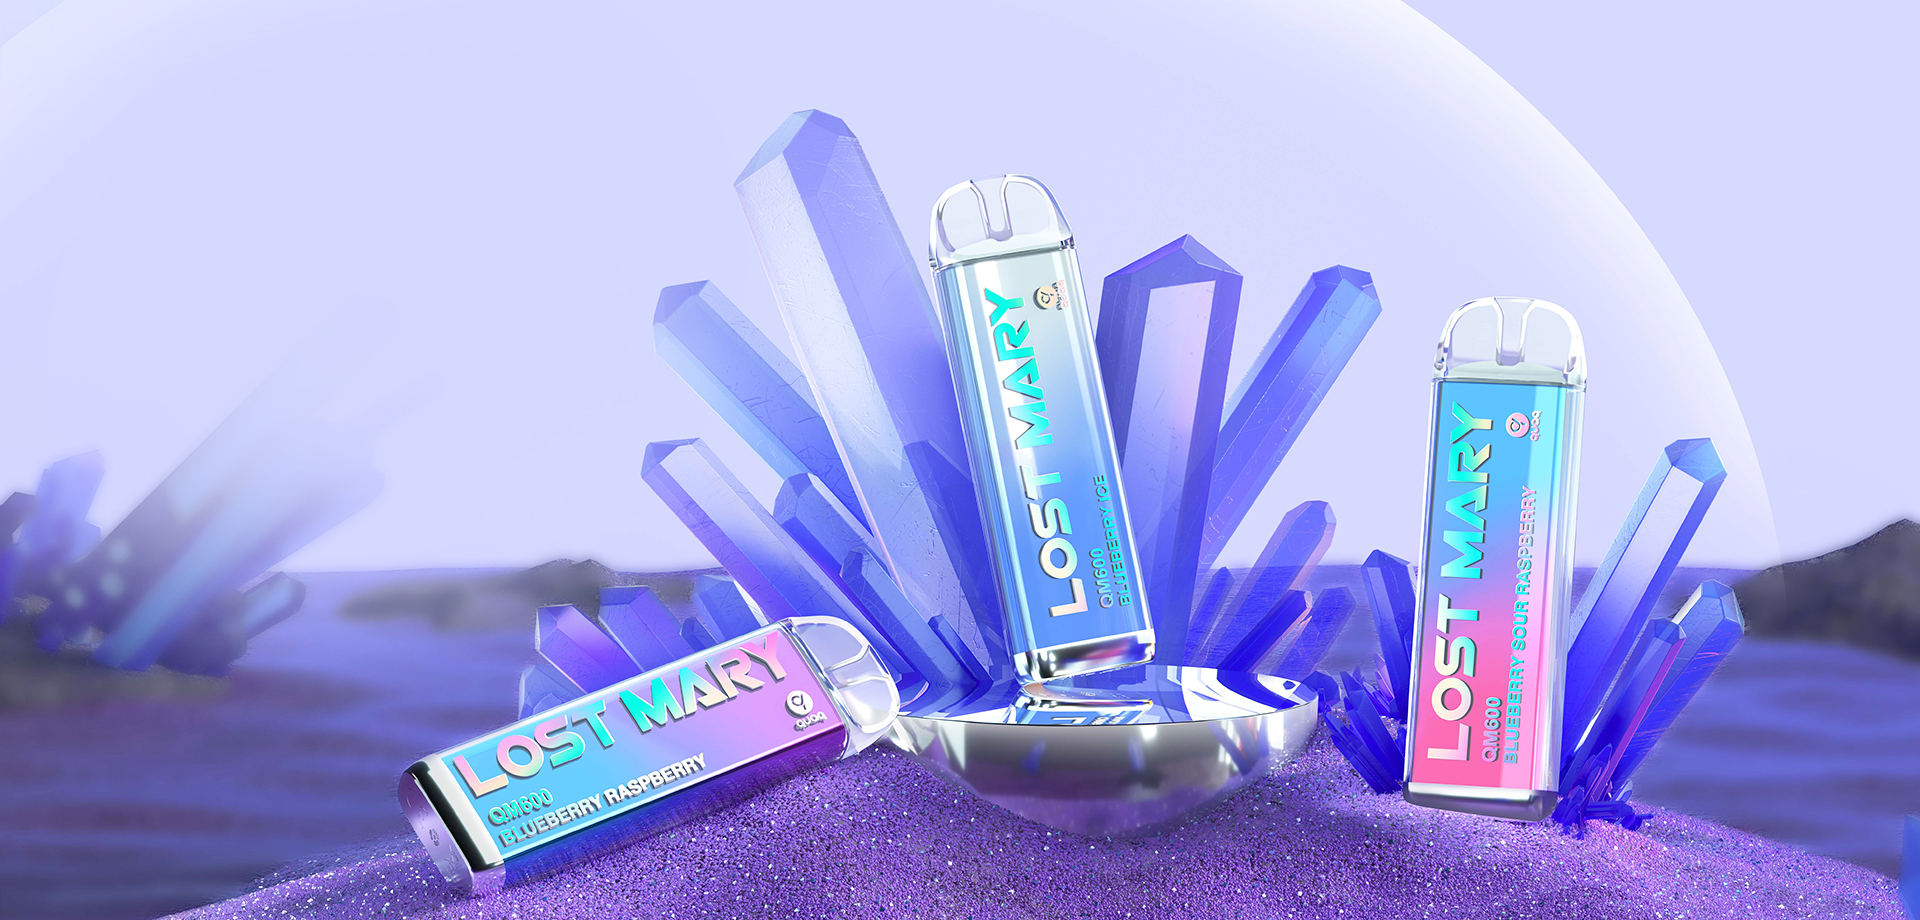 Buy genuine Lost Mary AM600 Disposable vapes